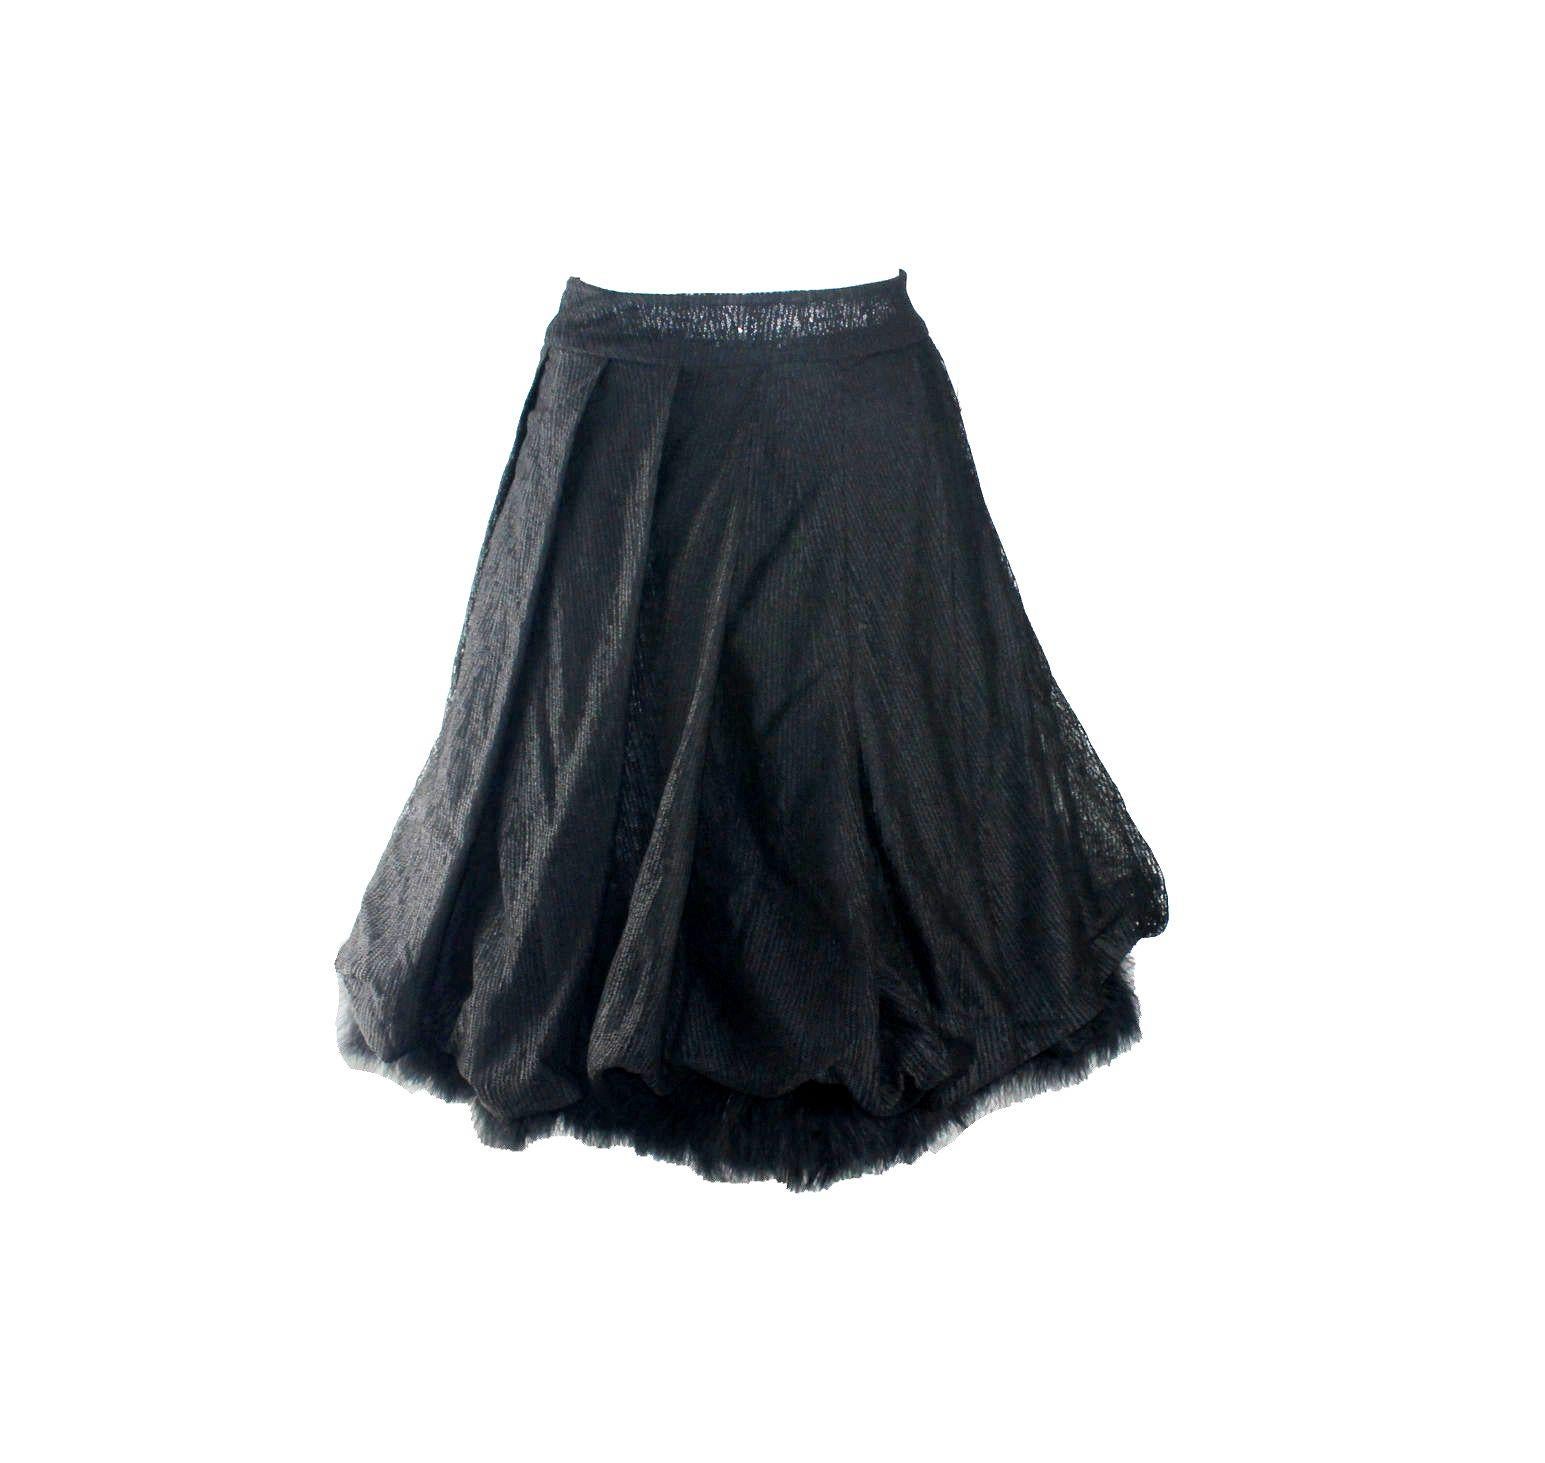 An exceptional  CHANEL evening skirt
A true CHANEL signature item that will last you for many years
A unique piece created from finest black tulle and mesh fabric
Lined with softest real feathers (Marabou?)
Closes with two buttons on back and